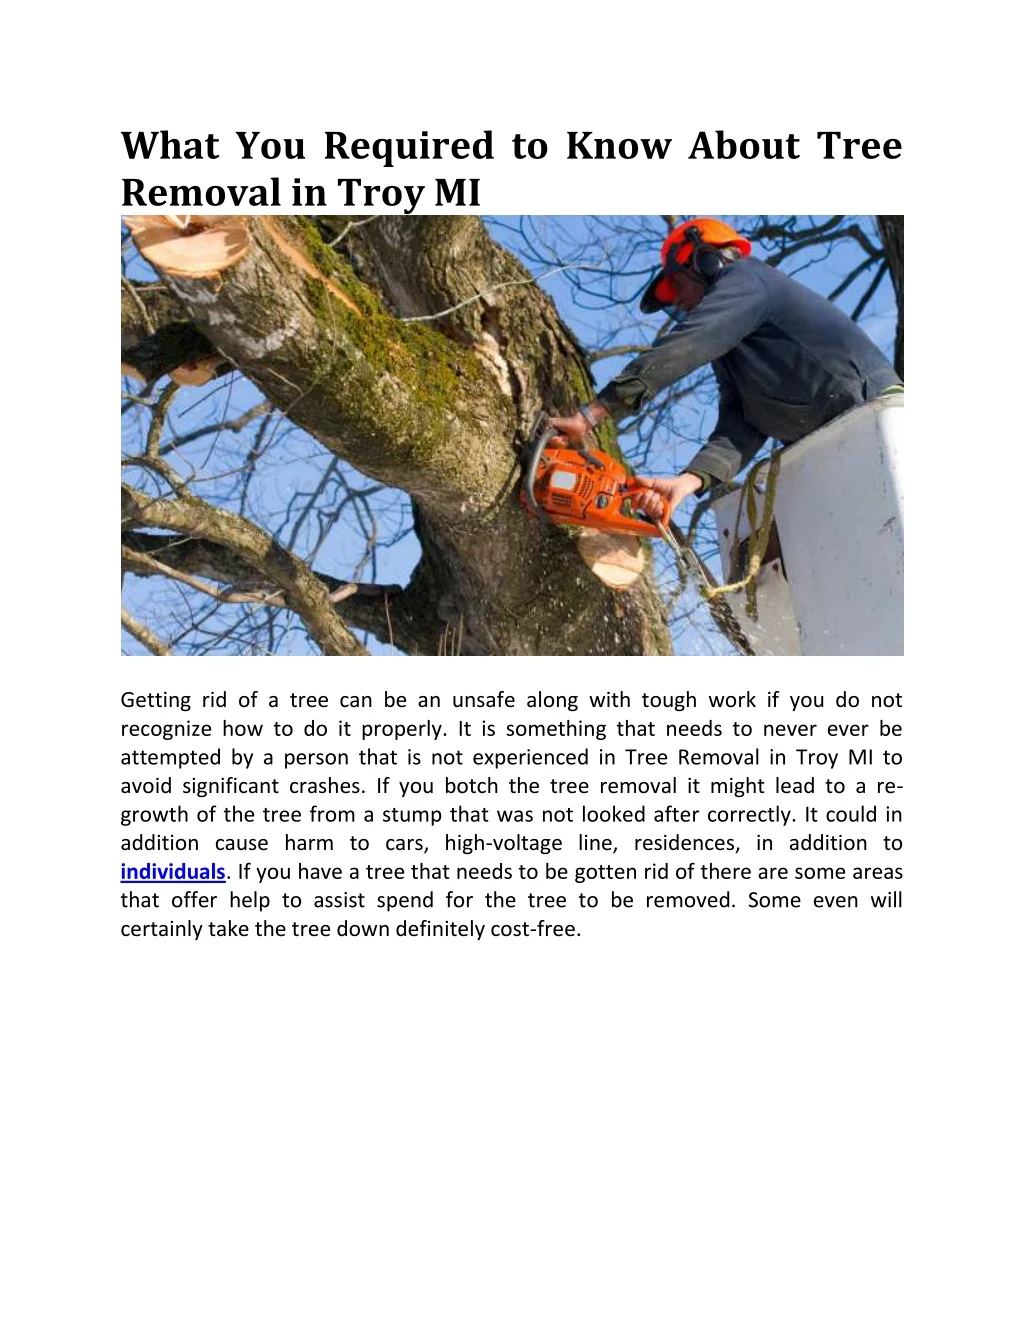 what you required to know about tree removal